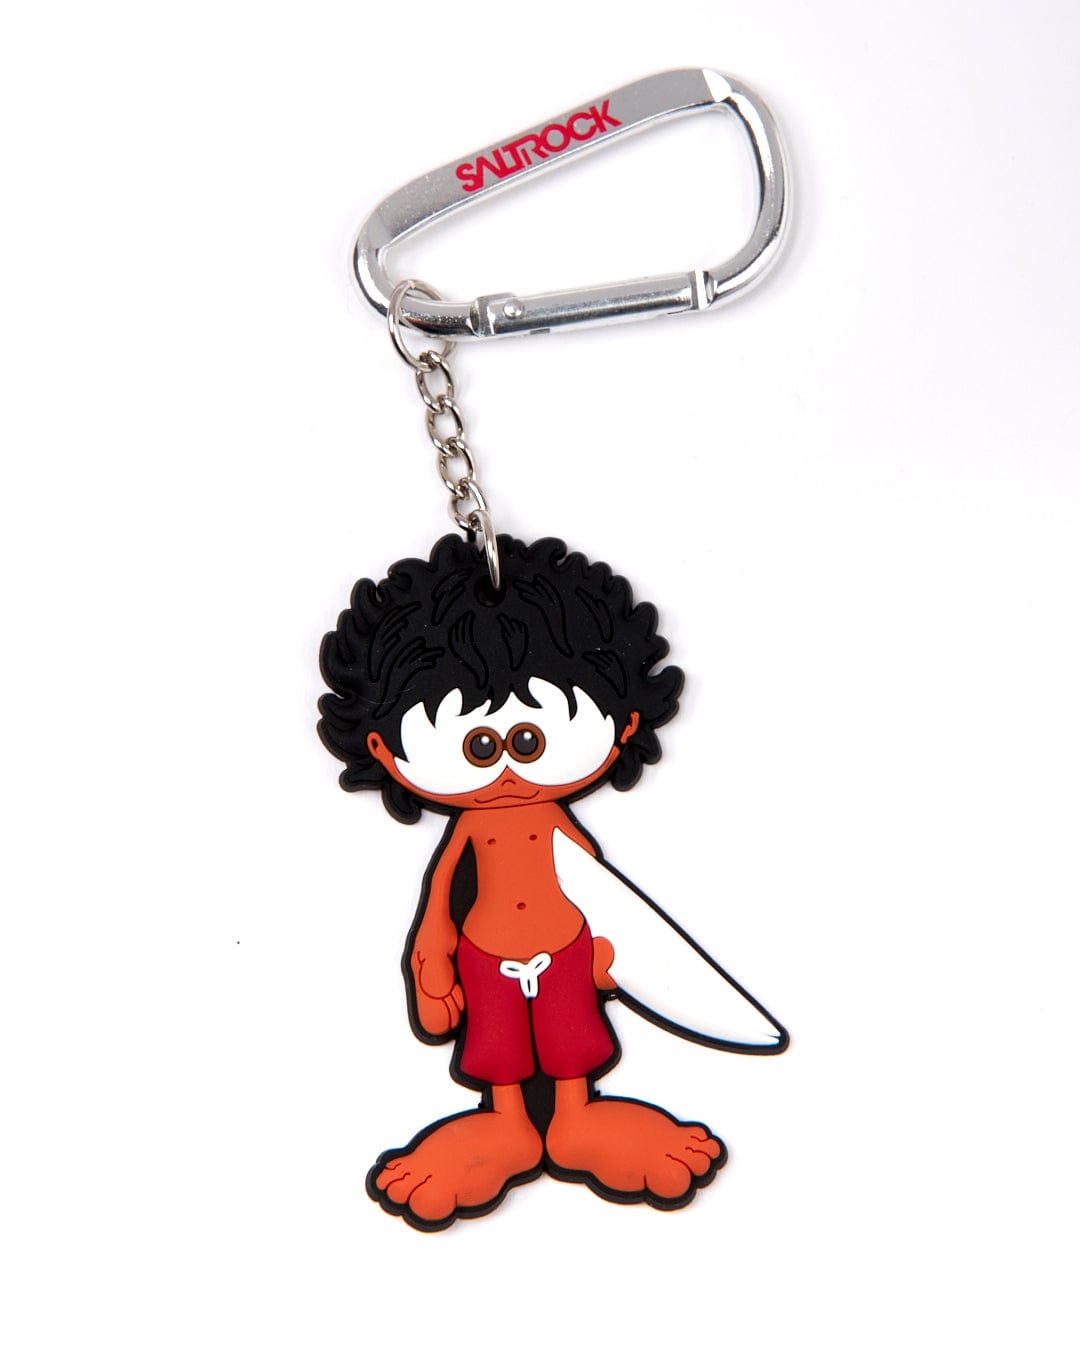 A Tok Keyring featuring the Saltrock mascot with a surfboard.